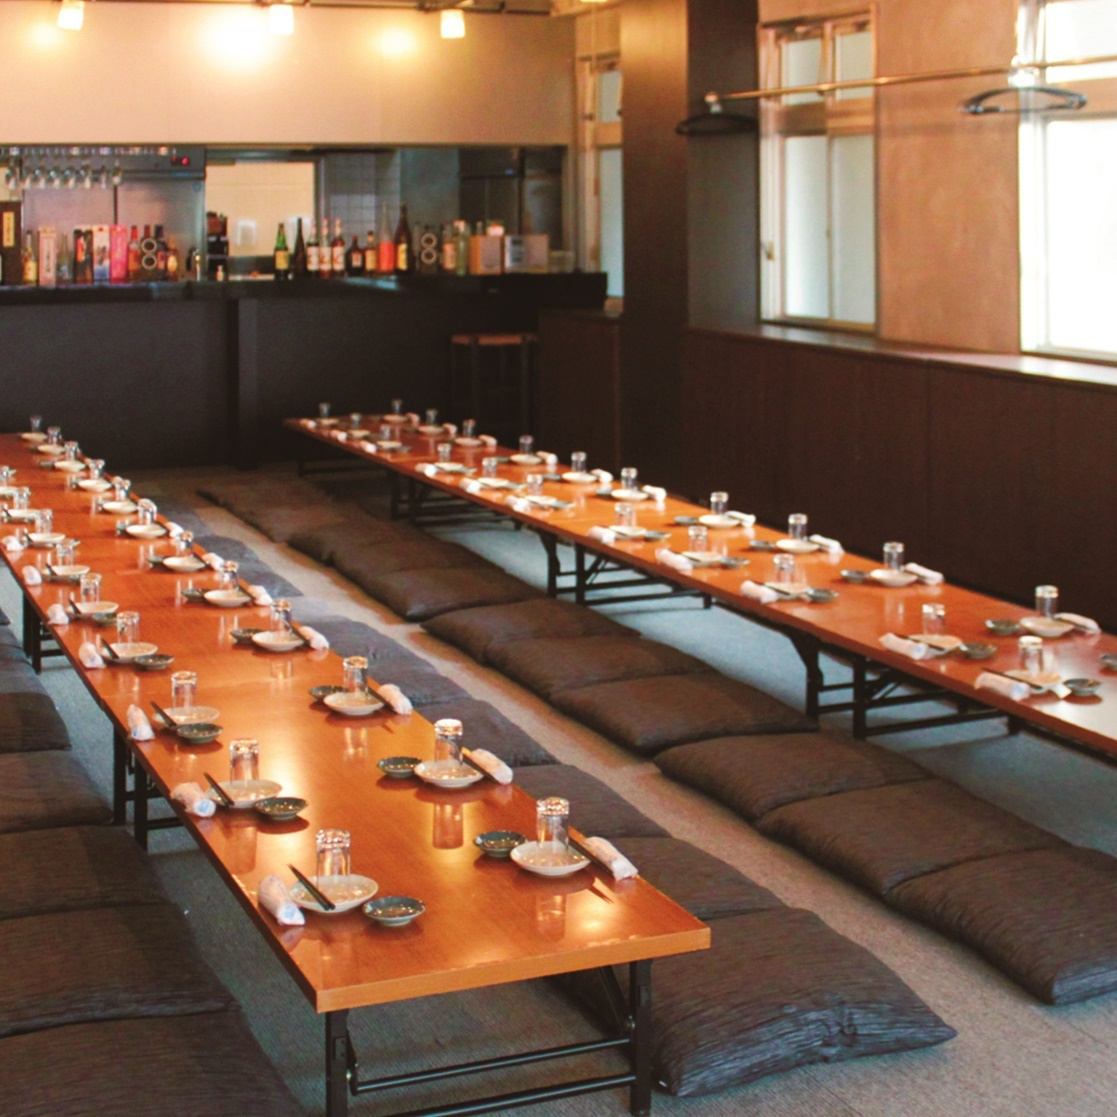 Large banquets are also welcome! Private reservations are possible for 25 to 60 people.